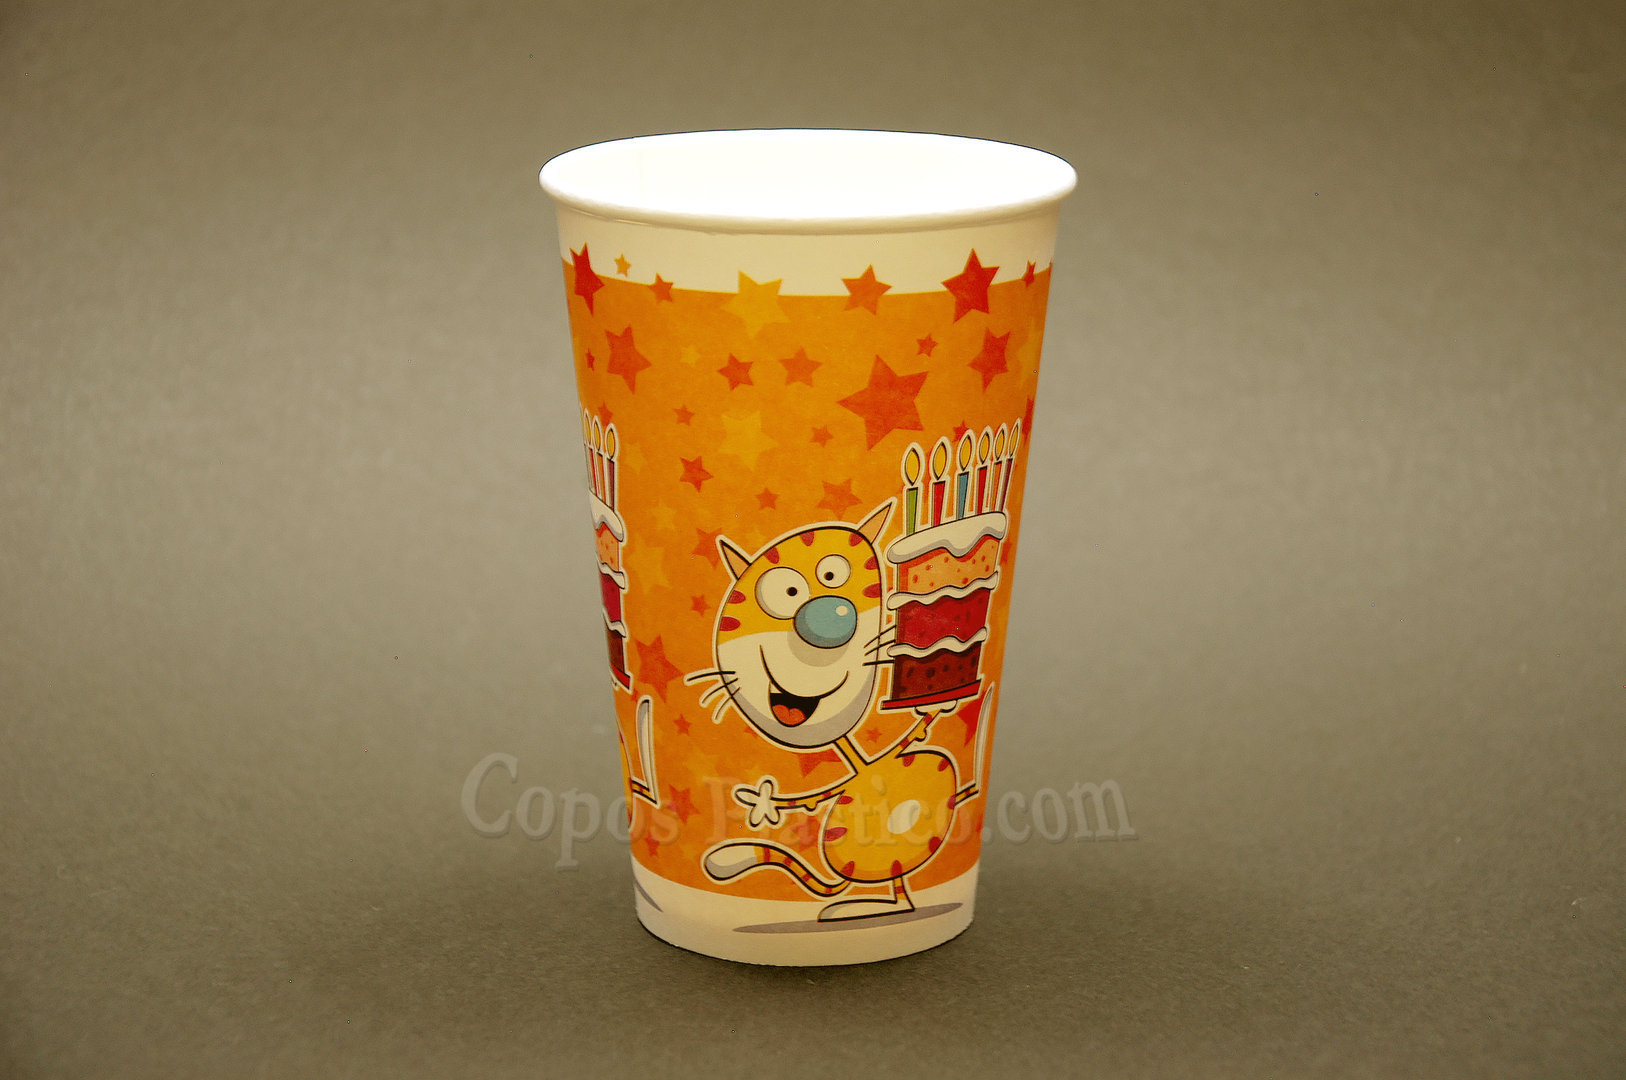 1000 Pieces 7 Oz(200 ml) Normal Paper Cup With Handle –